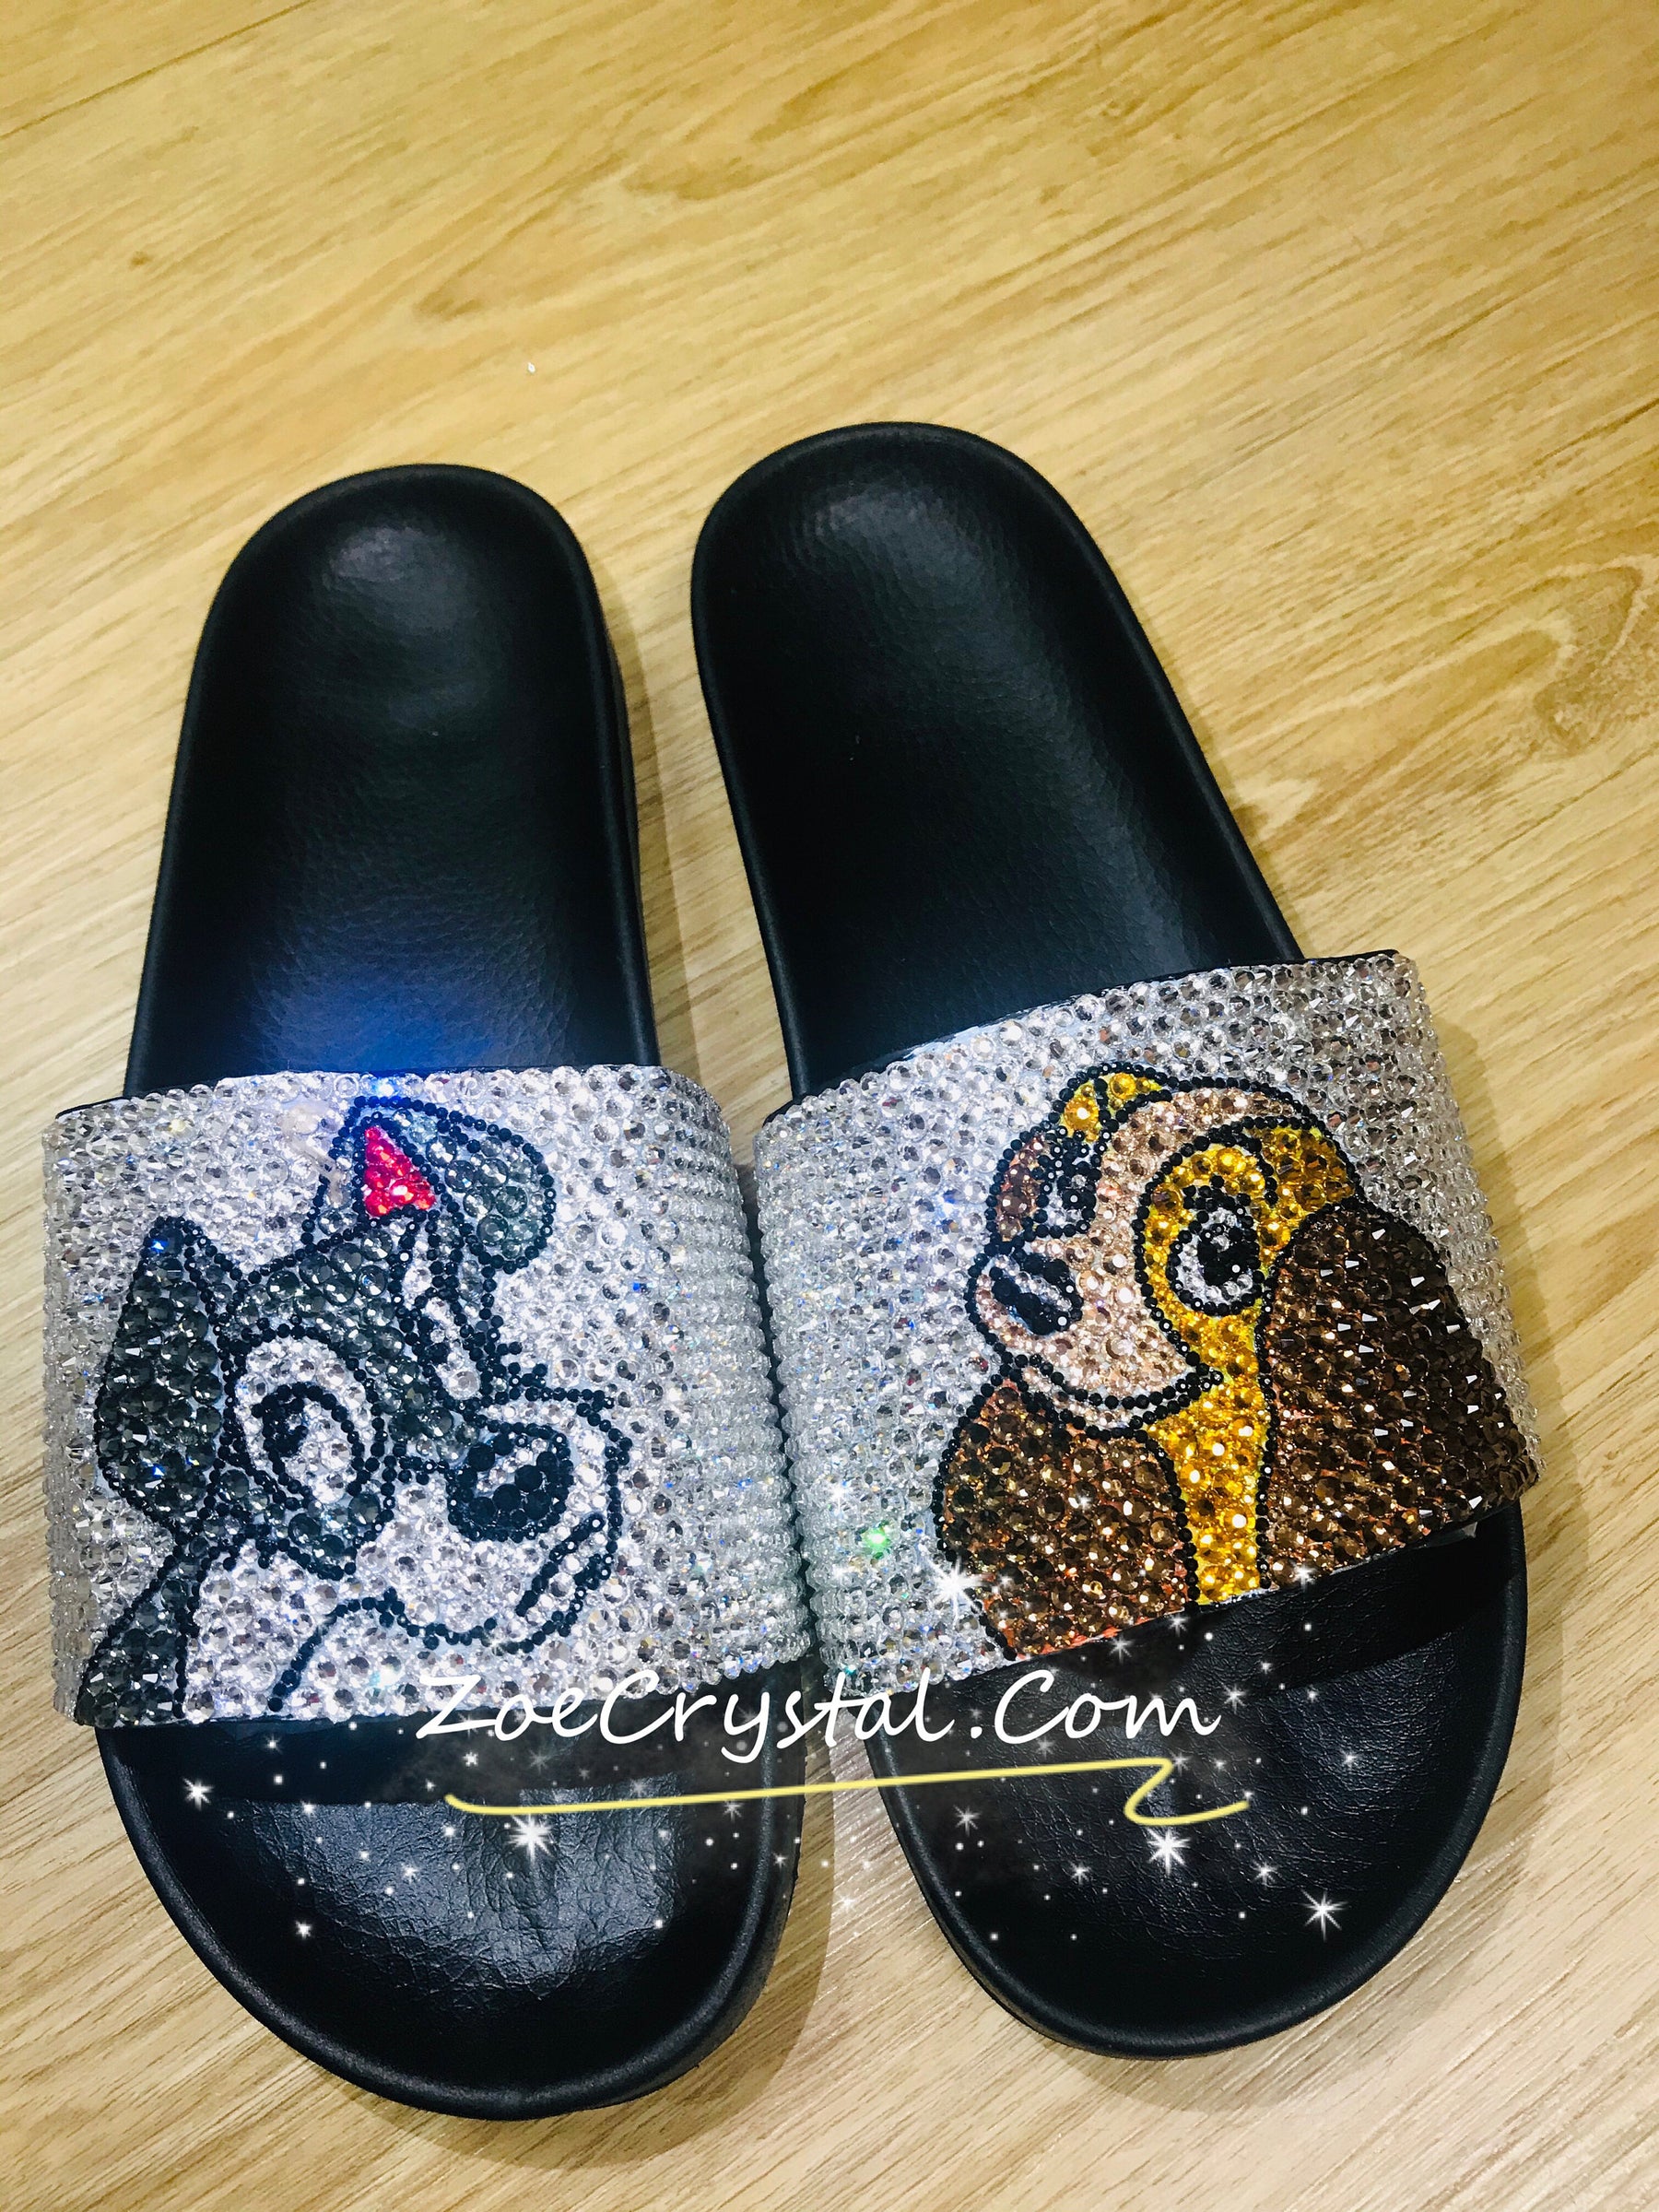 Customize Your SANDALS SLIDES Slippers in Summer Beach, Wedding, Fashion - Example of Lady and the tramp - Bedazzled Swarovski Rhinestone